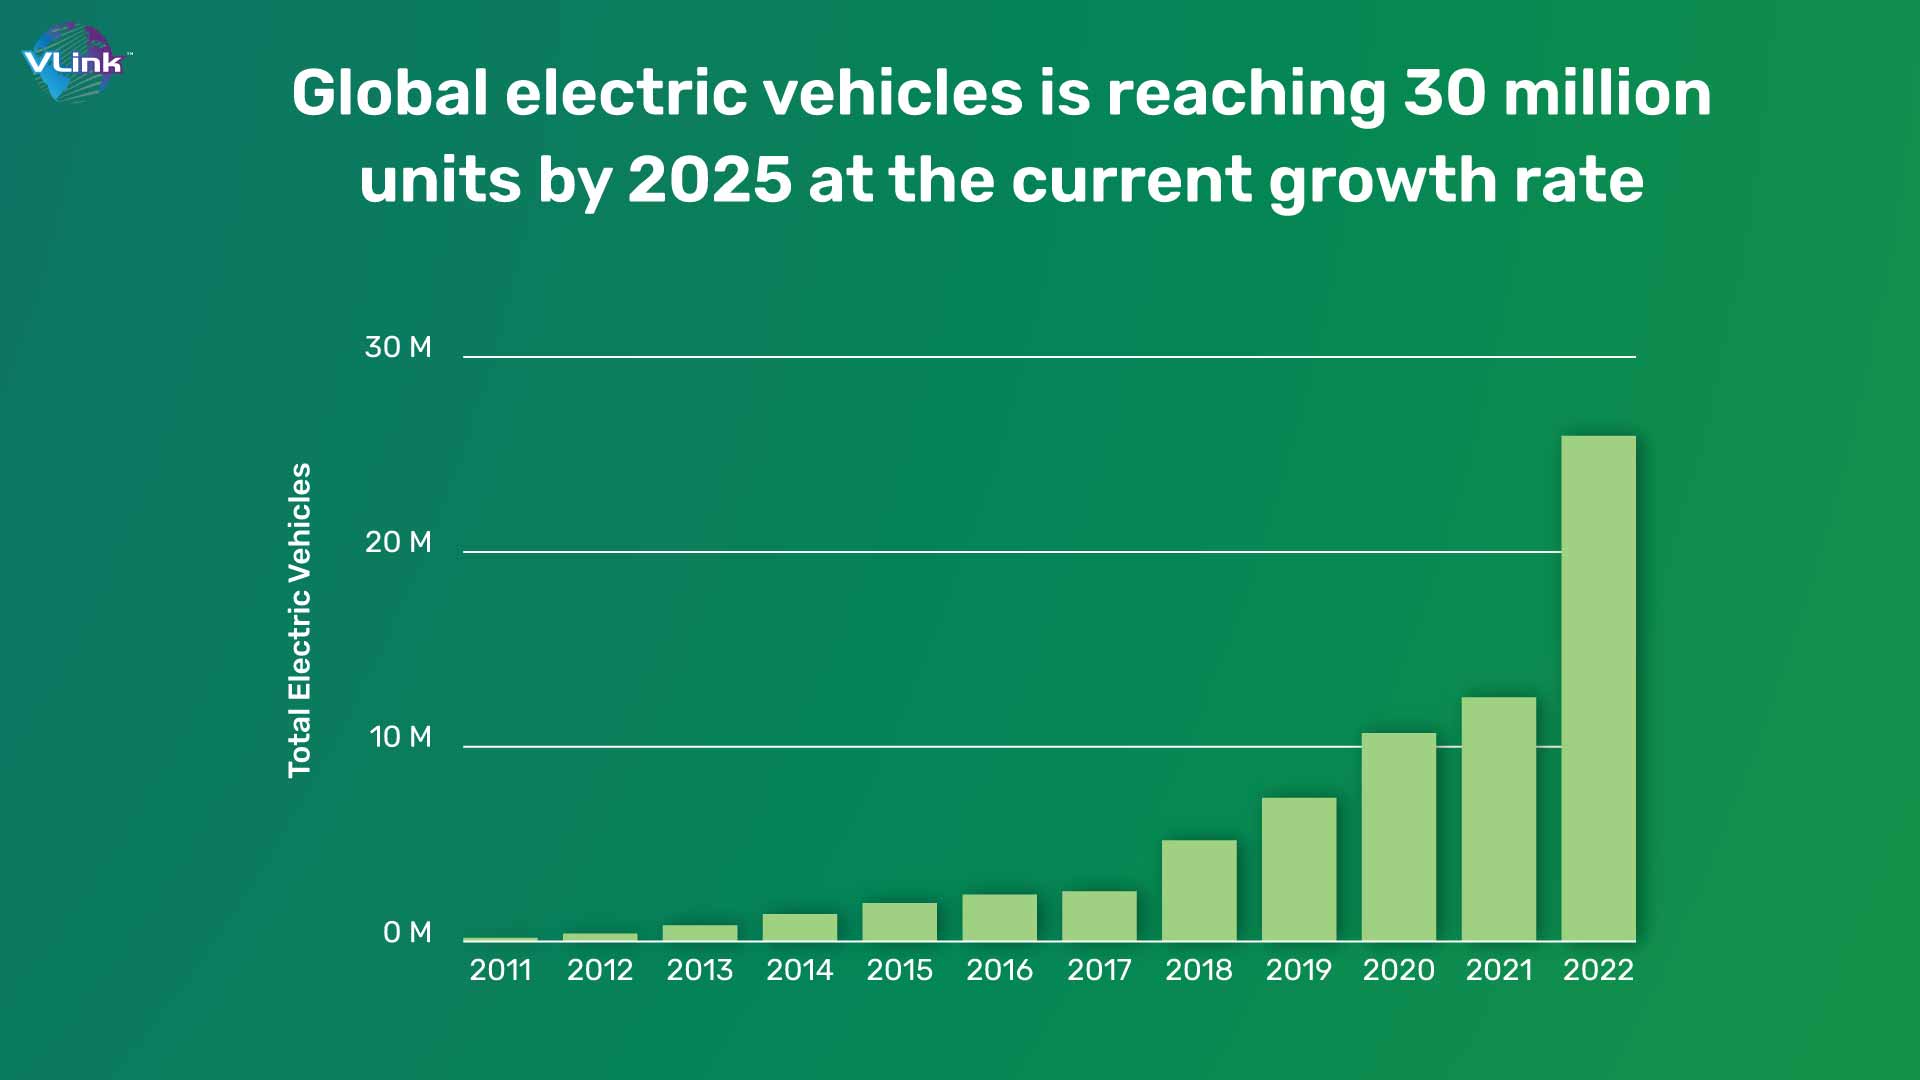 Global electric vehicles are reaching 30 million units by 2025 at the current growth rate